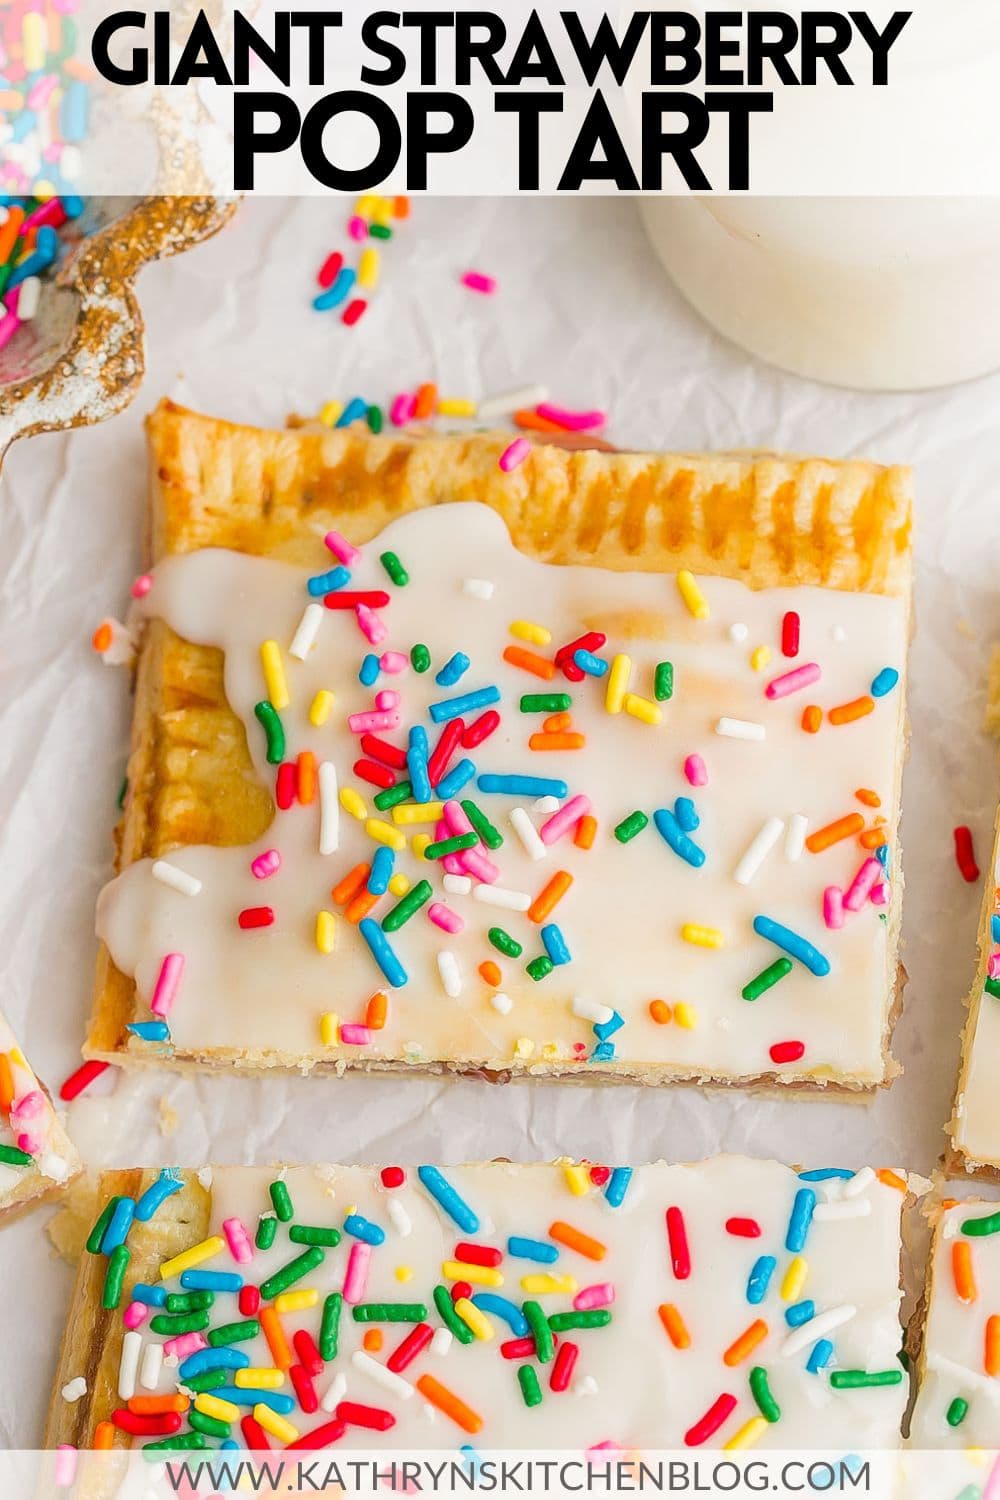 This Giant Strawberry Pop Tart is made with buttery store-bought pie crust, filled with strawberry jam, and topped with an easy glaze and rainbow sprinkles! Perfect for breakfast, dessert, or anytime you want a fun treat!
 via @kathrynskitchen